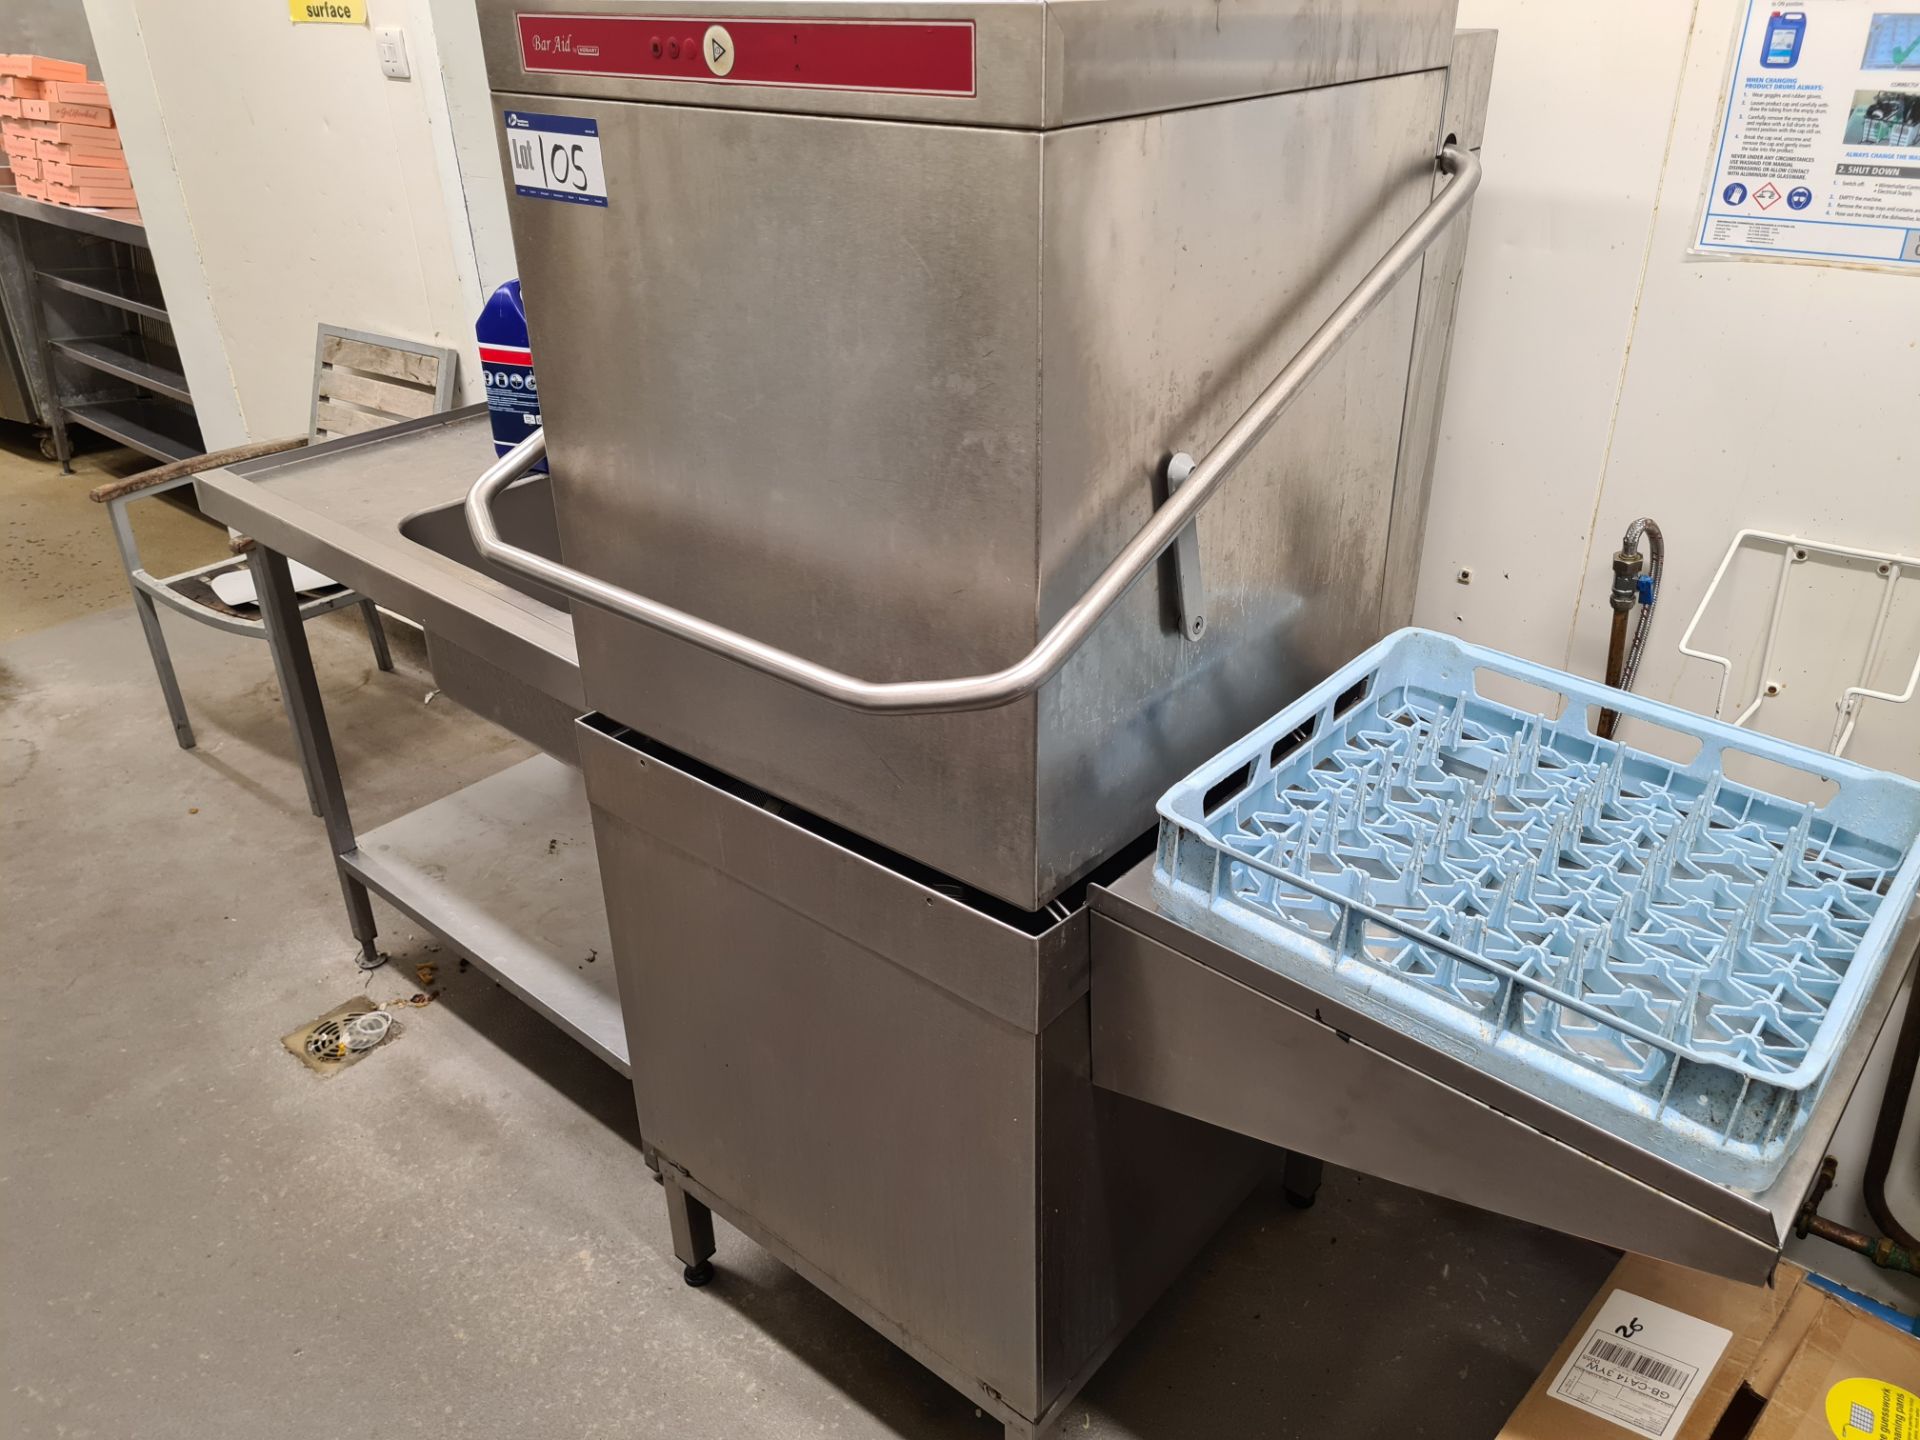 HOBART Bar Aid Stainless Steel Dish Washer c/w Stainless Steel Side Shelf and Stainless Steel Single